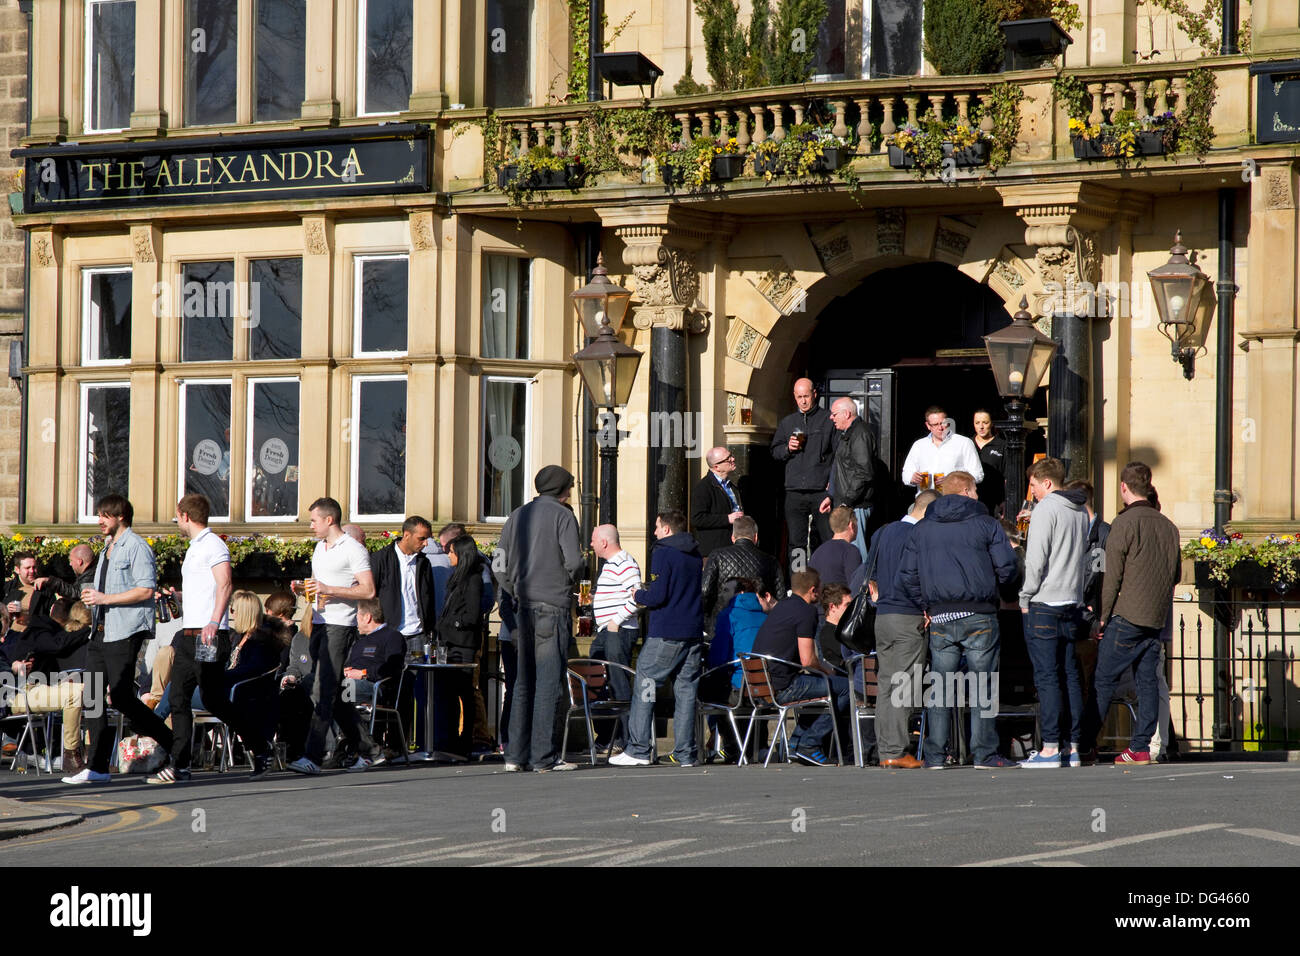 People drinking outside popular pub on saturday afternoon, The Alexandra, Prospect Place, Harrogate, North Yorkshire, England,UK Stock Photo